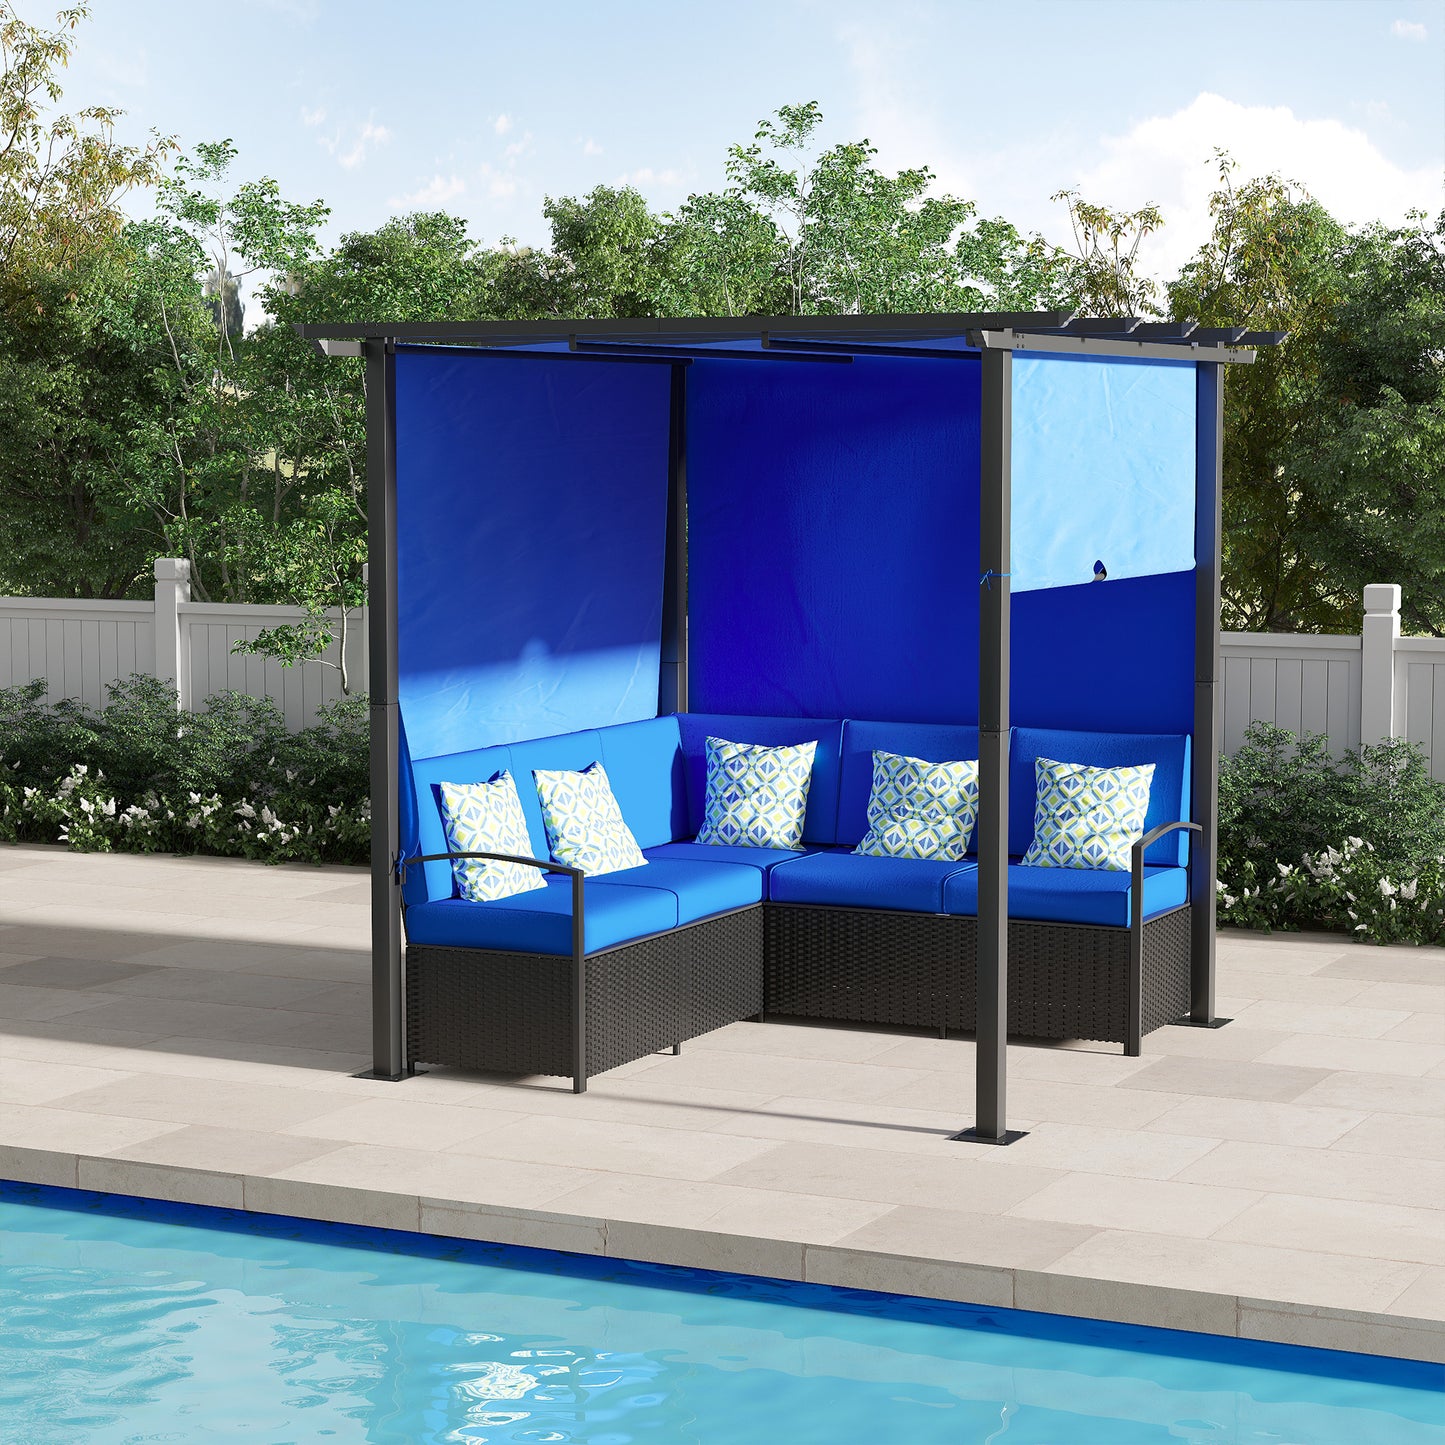 Wicker Patio Furniture, Outdoor PE Rattan Sofa Set with Retractable Canopy Pergola, Shade Shelter for Deck, Pool, Garden, Terrace, Blue at Gallery Canada